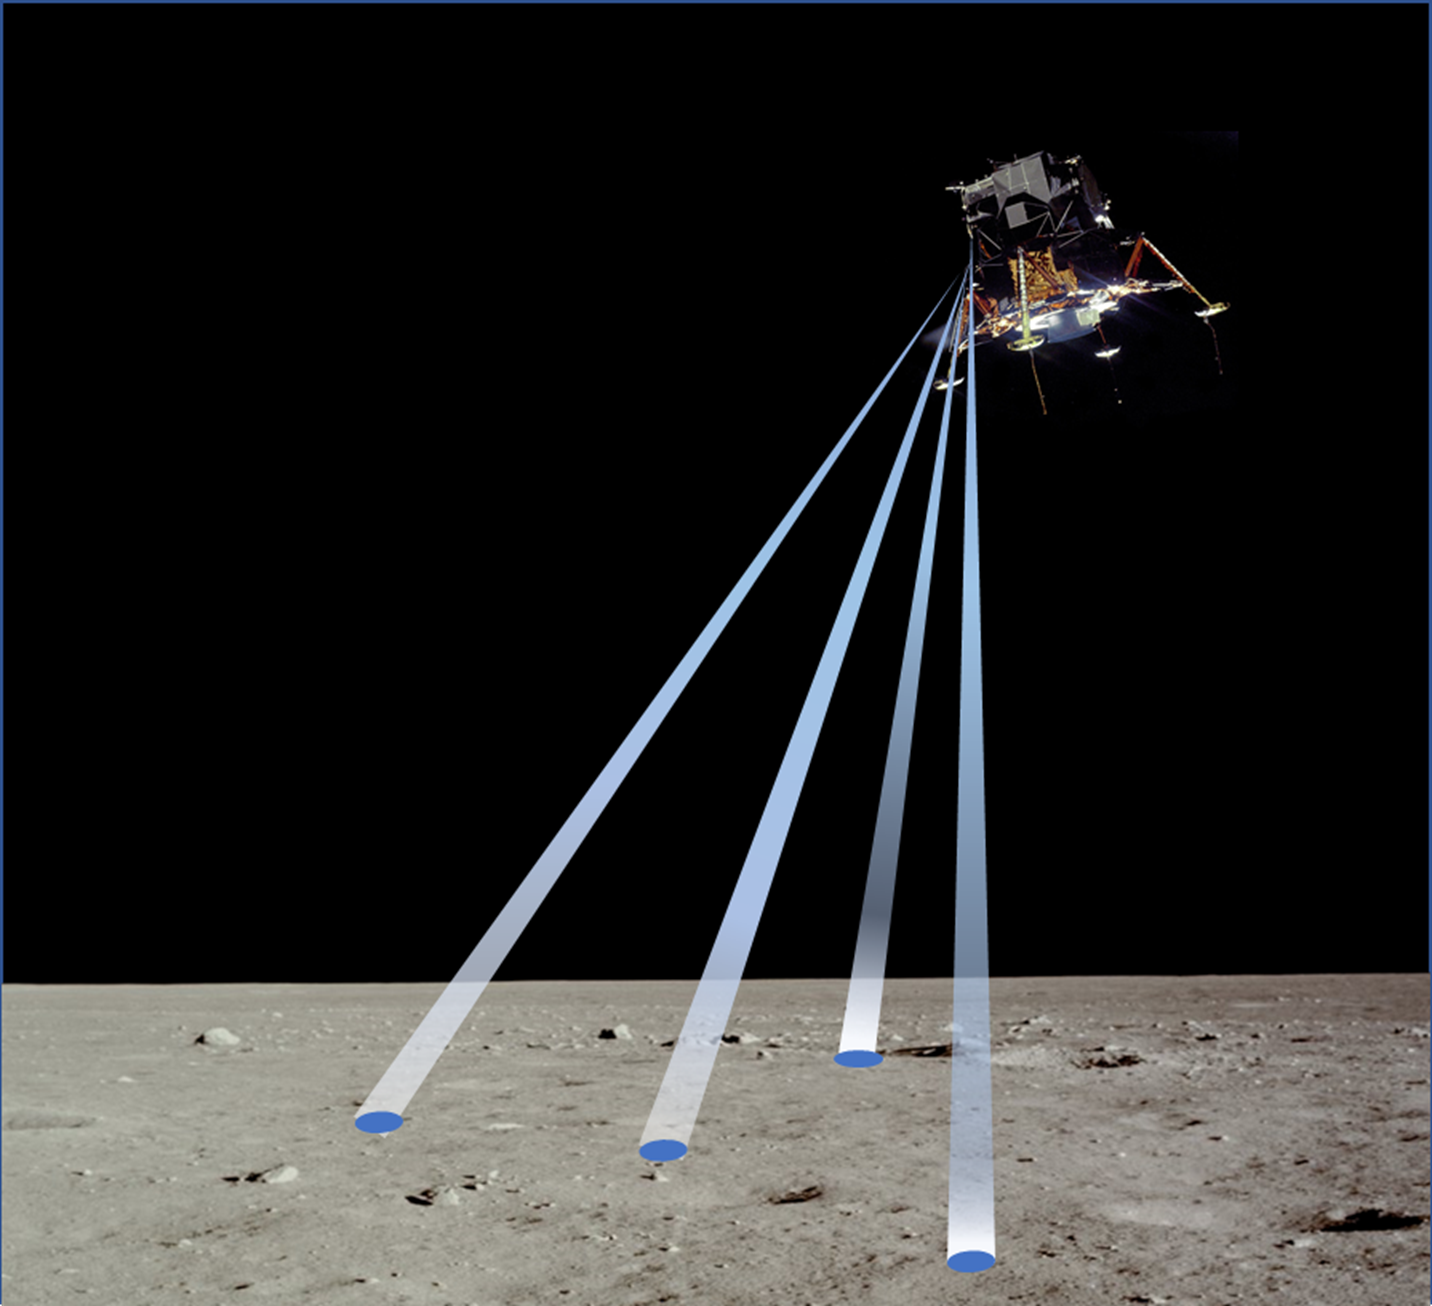 Tech Transmits with Laser Beams for Velocity and Distance to Lunar Surface.